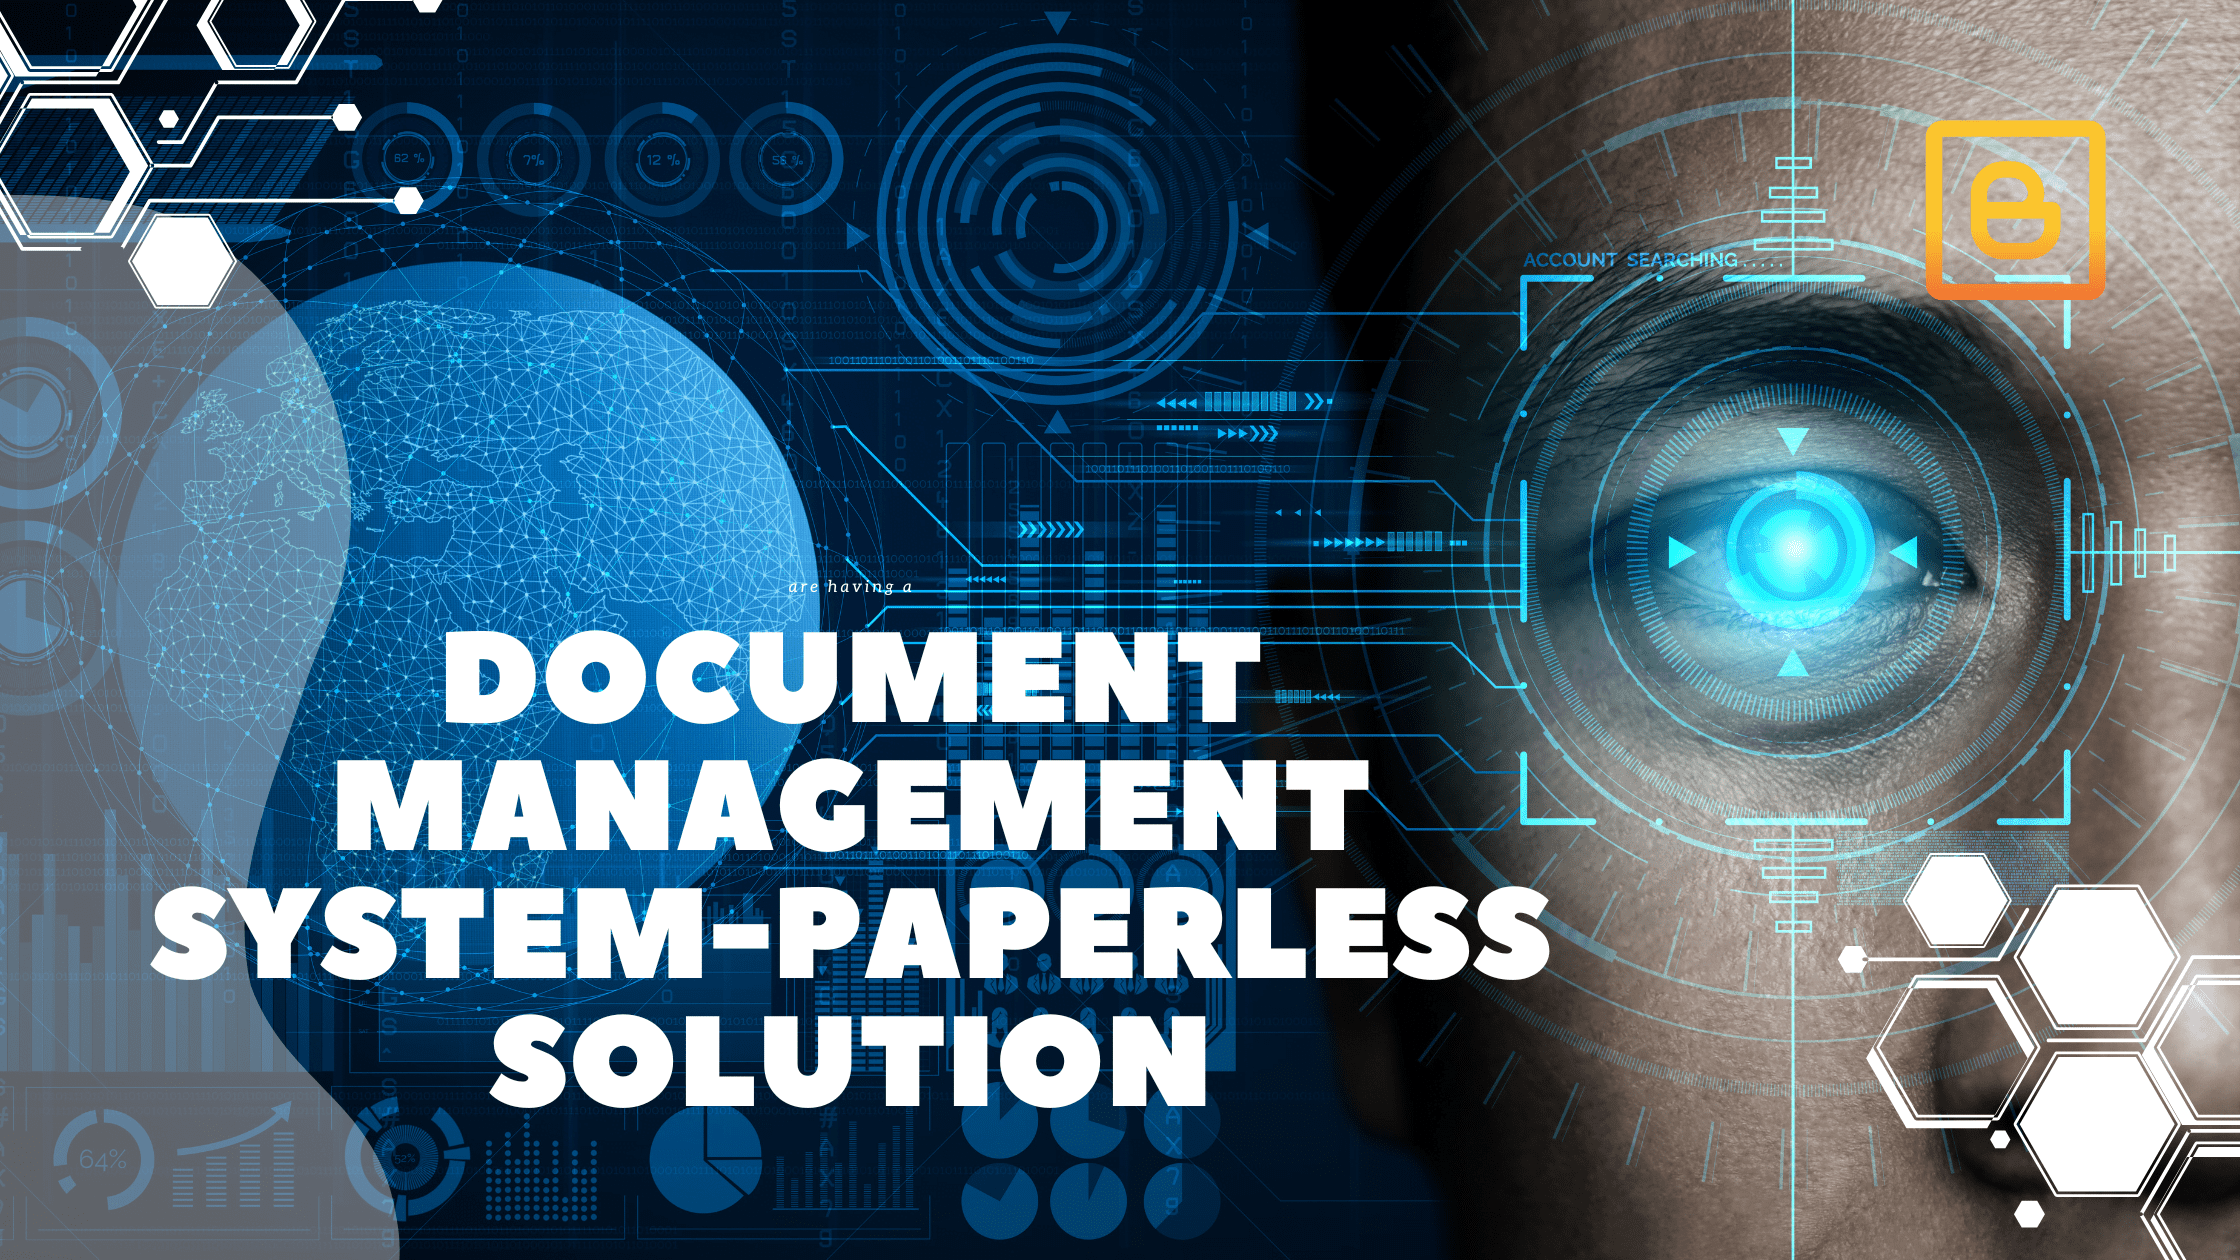 Document Management System-Paperless Solution